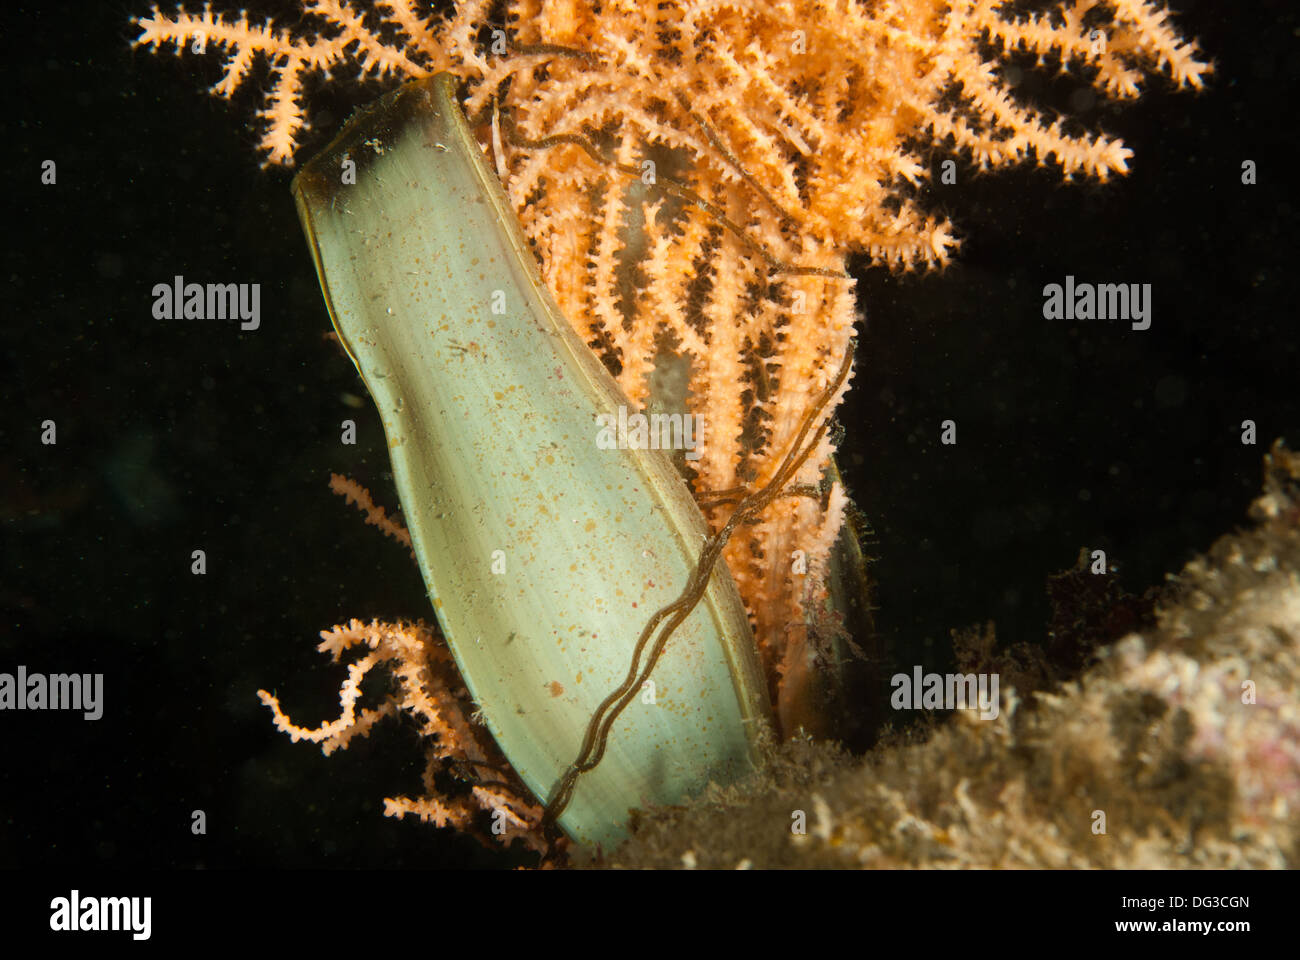 A mermaid's purse tied securely onto a Pink Sea fan. Stock Photo